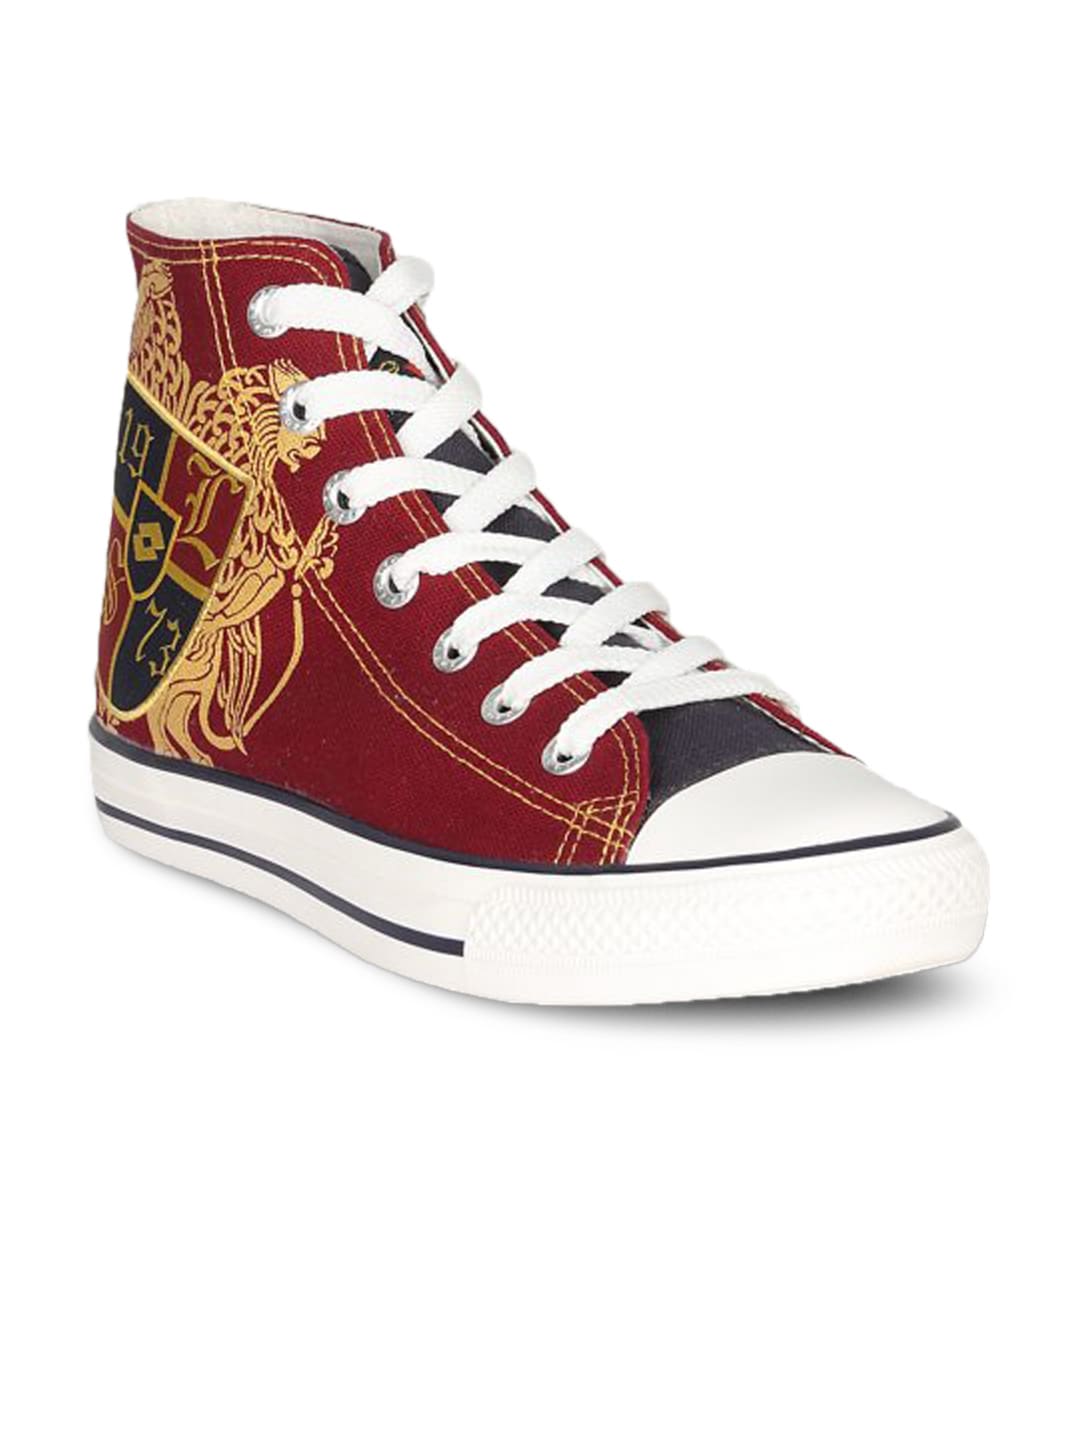 Lotto Unisex Canvas Red Shoe